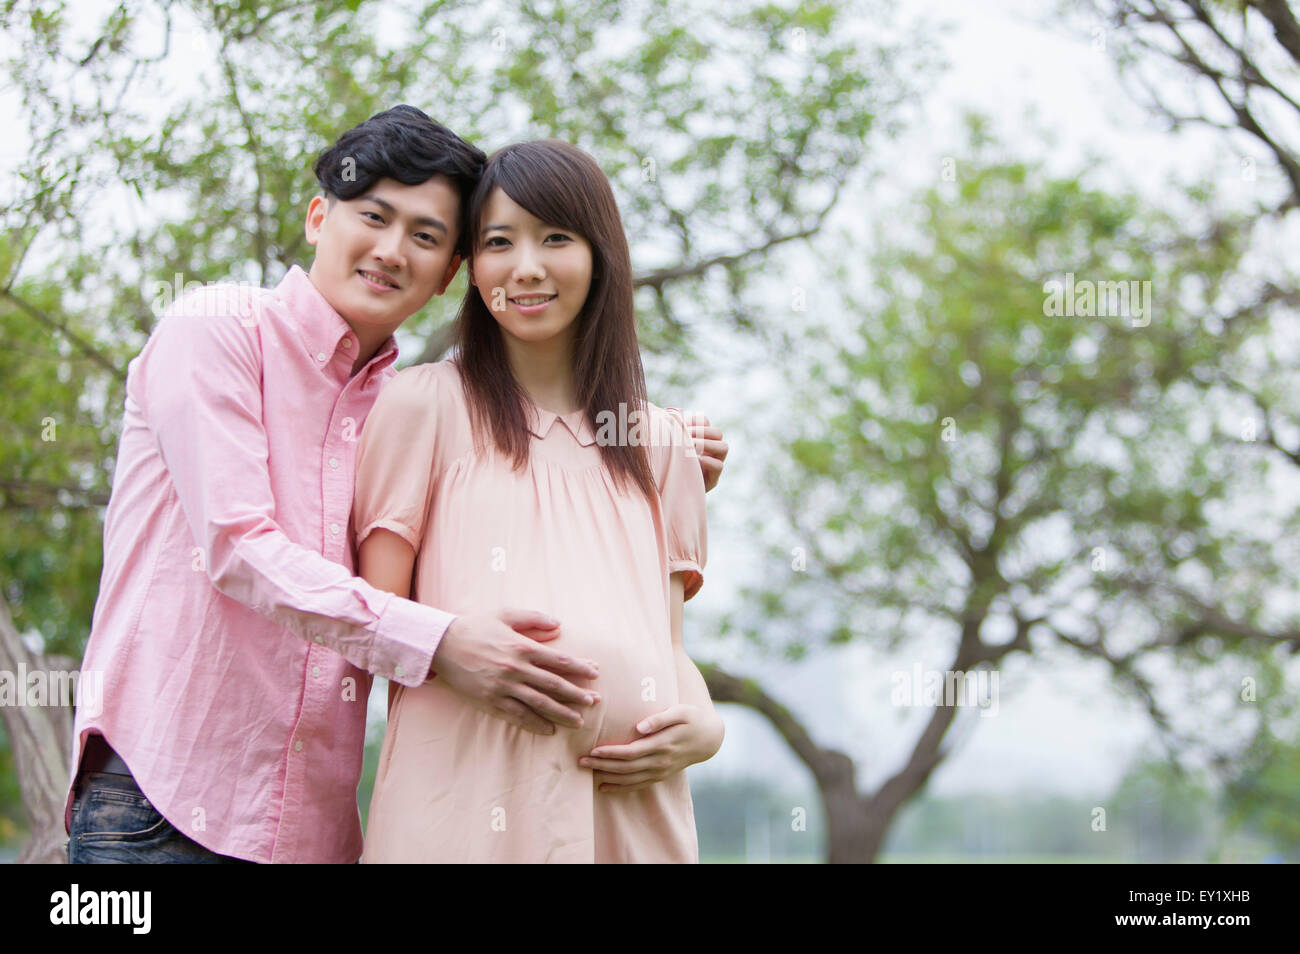 Young man embracing pregnant woman and smiling at the camera, Banque D'Images